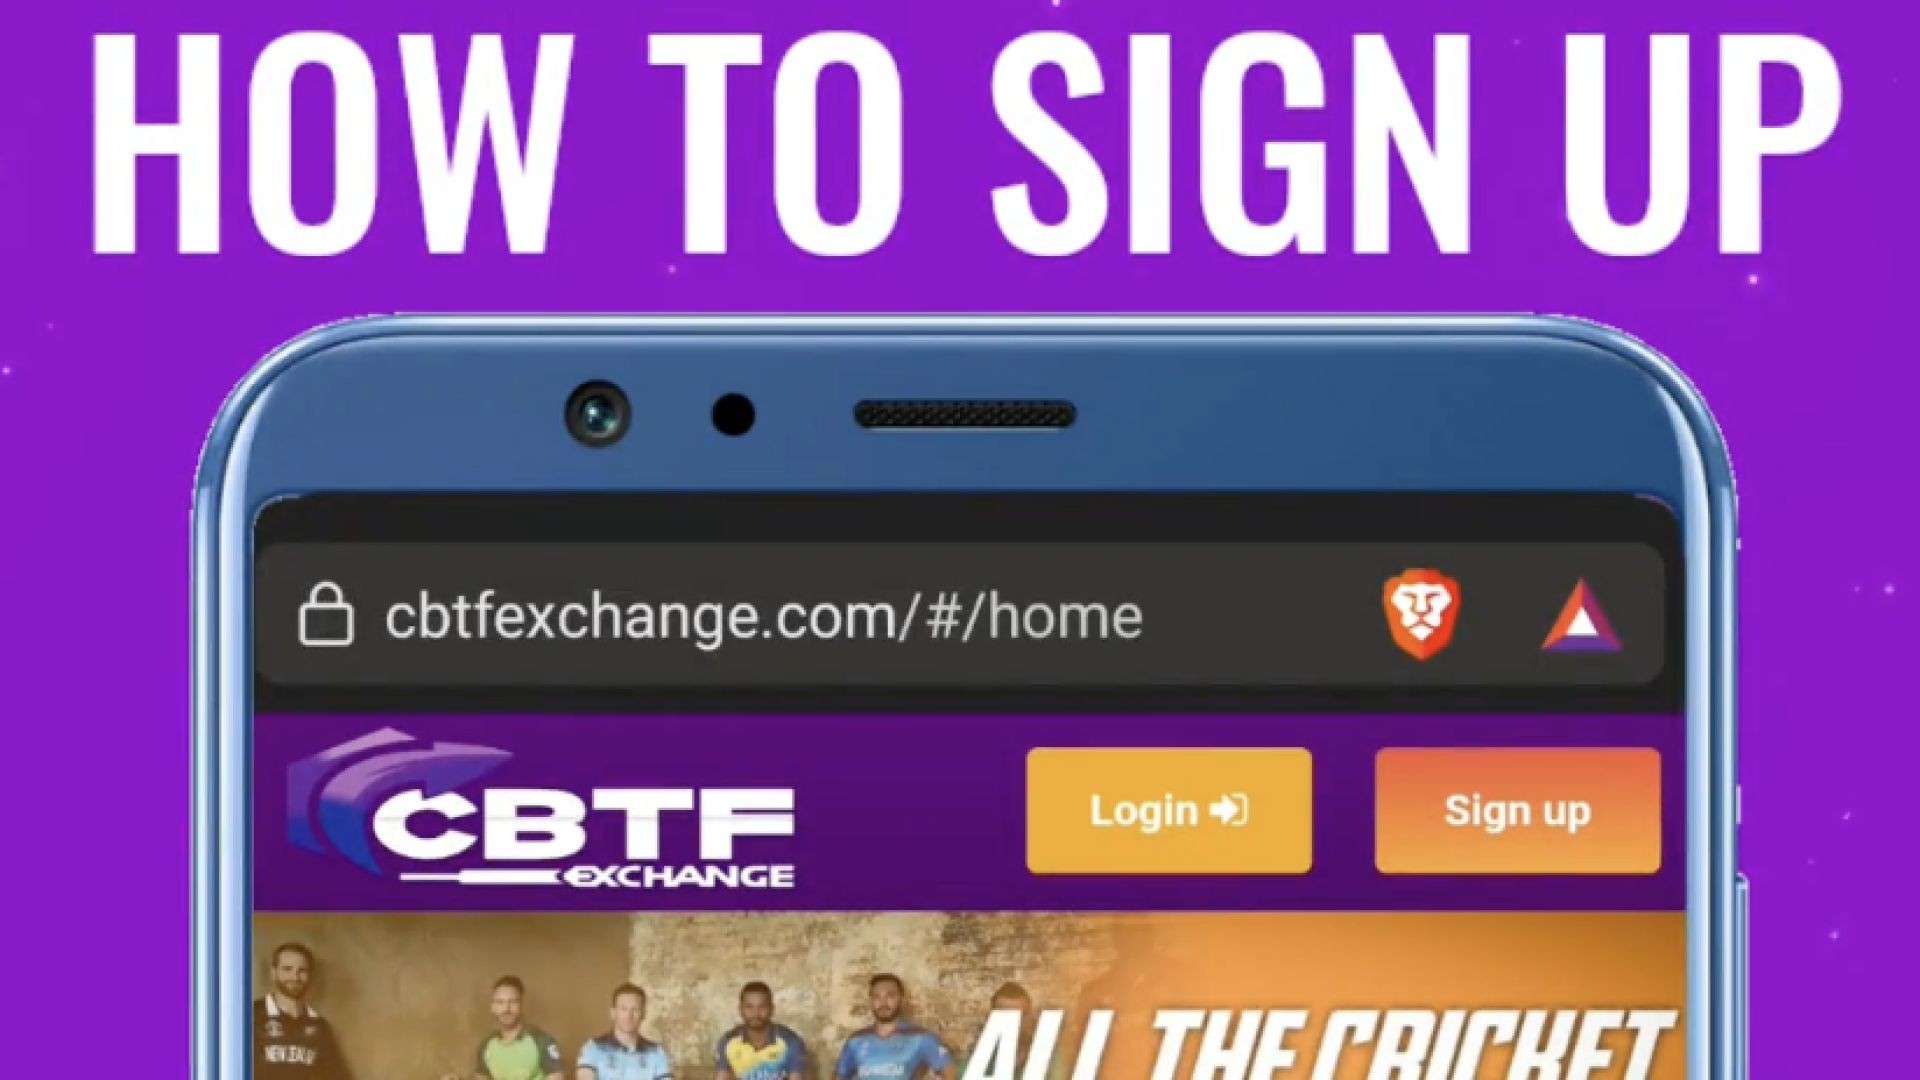 CBTF Exchange Signup Guide: Step-by-Step Tutorial